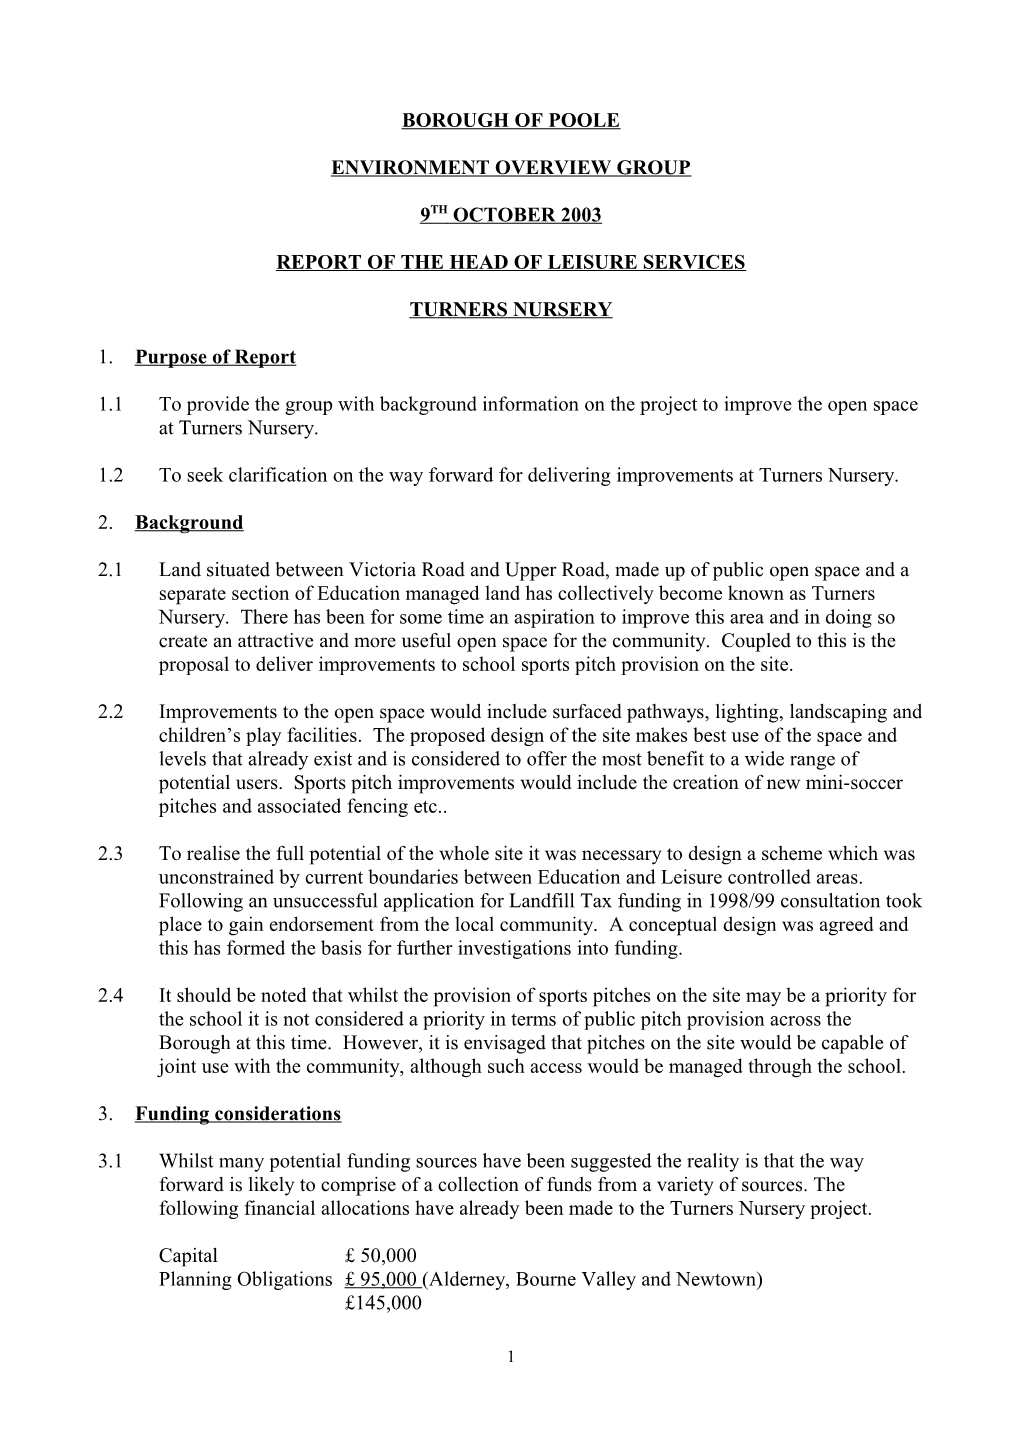 Report of the Head of Leisure Services